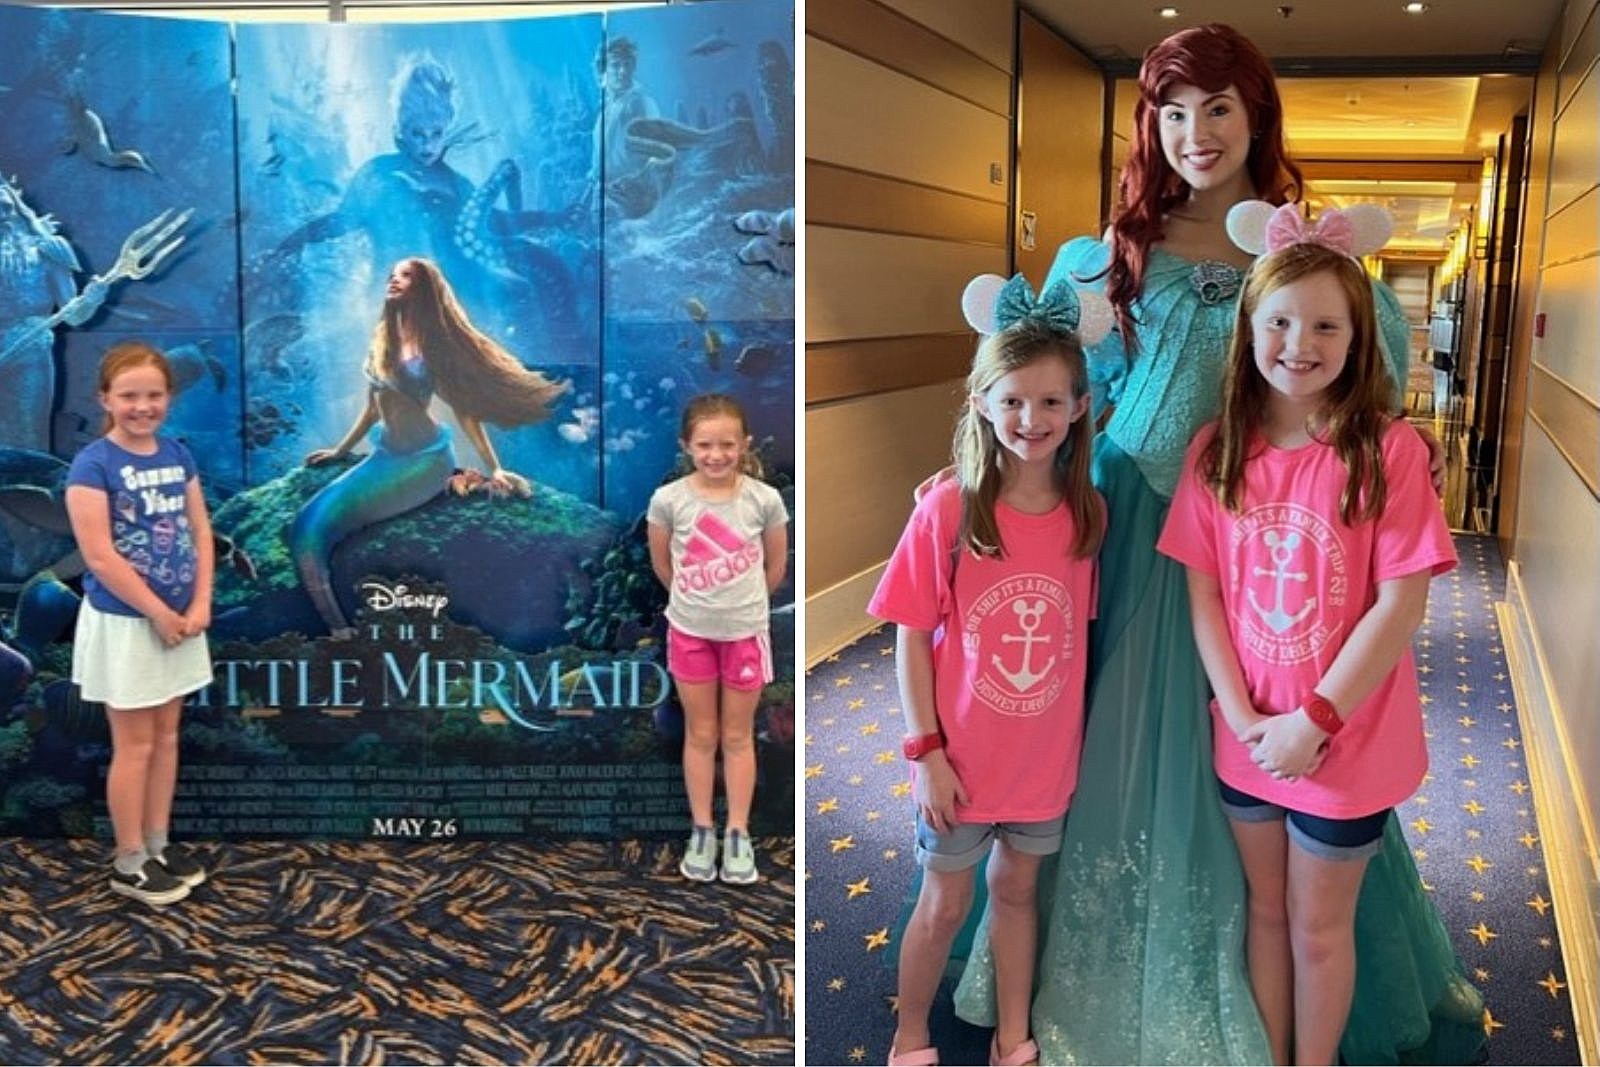 Illinois Meaningful Connection to New Little Mermaid Movie